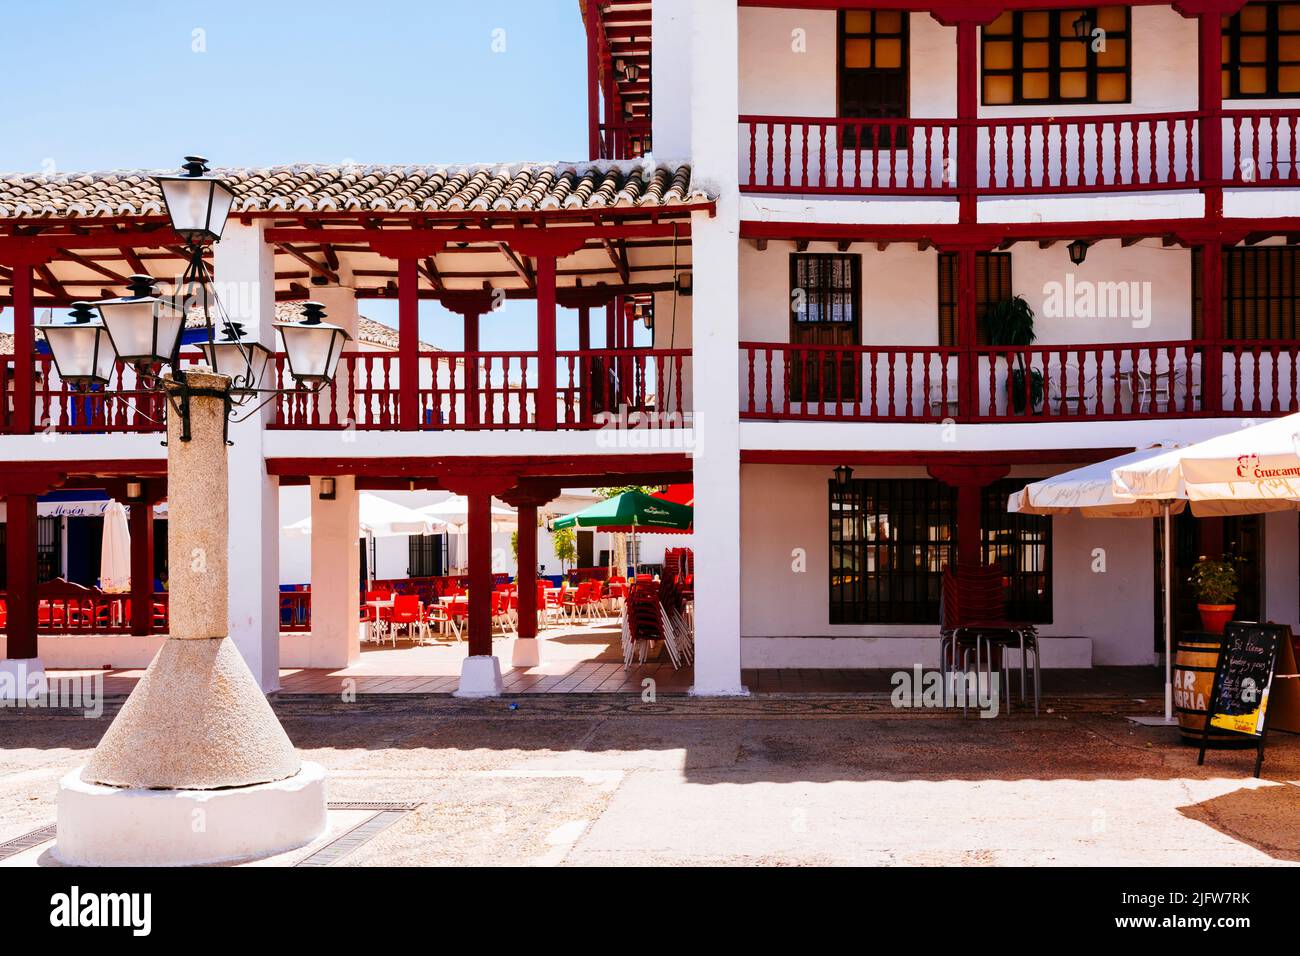 The Plaza de la Constitución, Plaza Mayor, in Puerto Lápice is a La Mancha-style square, with two levels of wooden arcades painted red. Puerto Lápice, Stock Photo